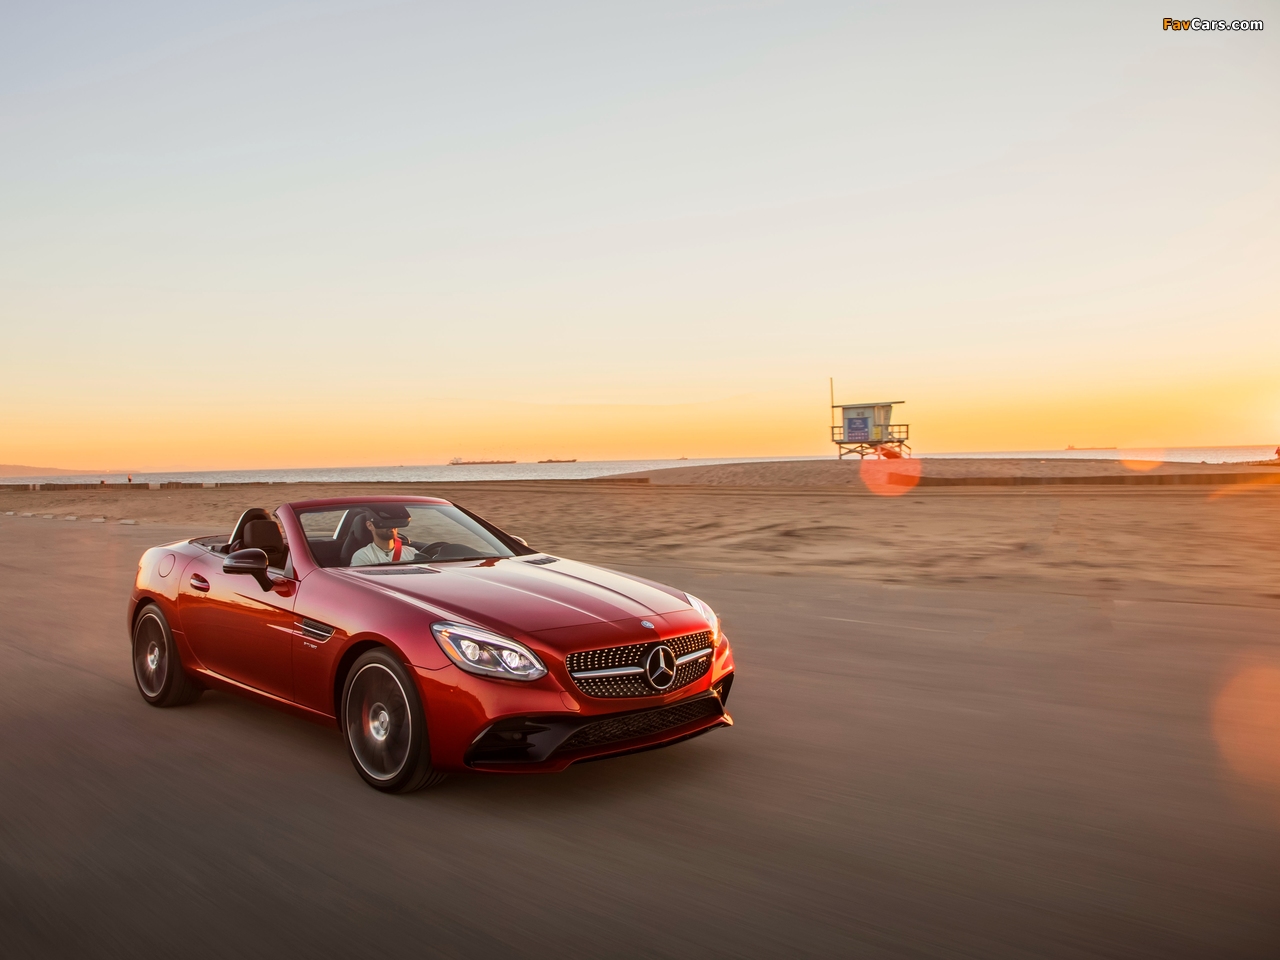 Mercedes-AMG SLC 43 North America (R172) 2016 pictures (1280 x 960)